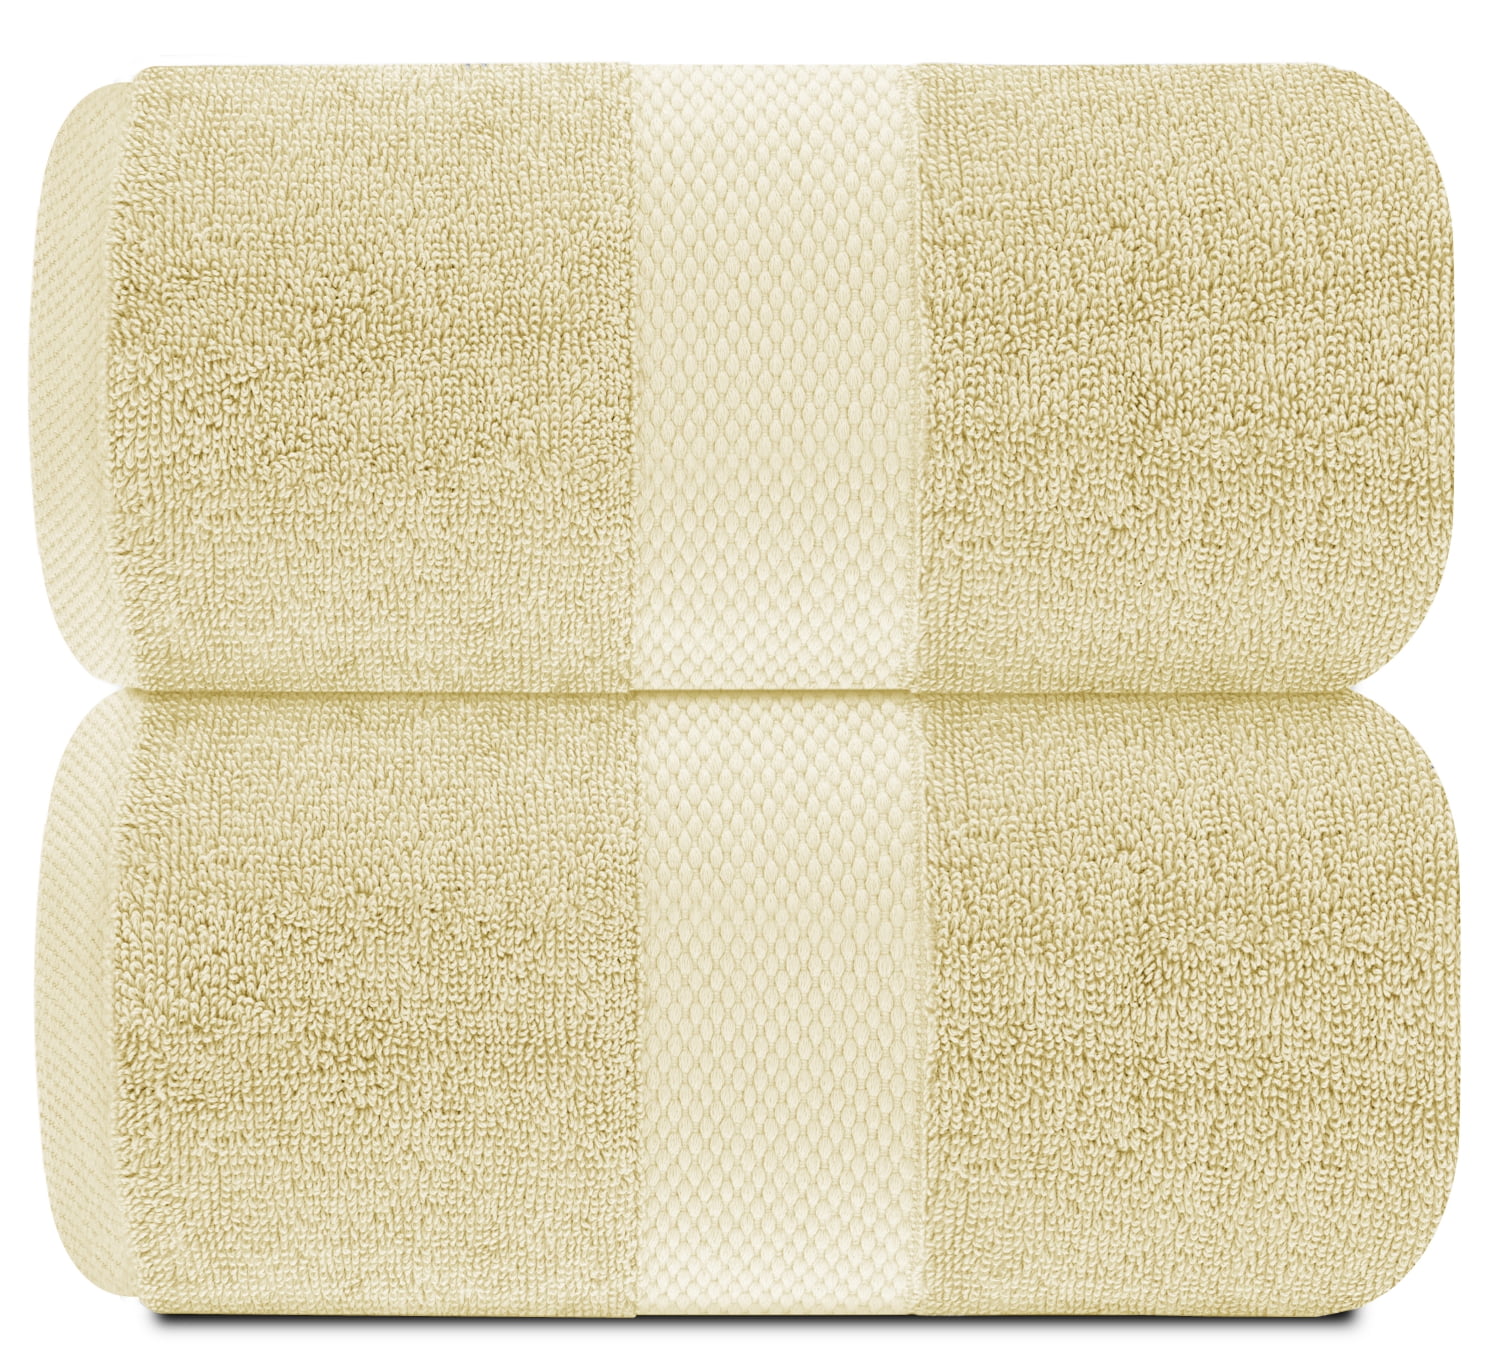  White Classic Luxury Soft Beige Bath Sheet Towels - 650 GSM  Cotton Luxury Bath Towels Extra Large 35x70, Highly Absorbent and Quick  Dry